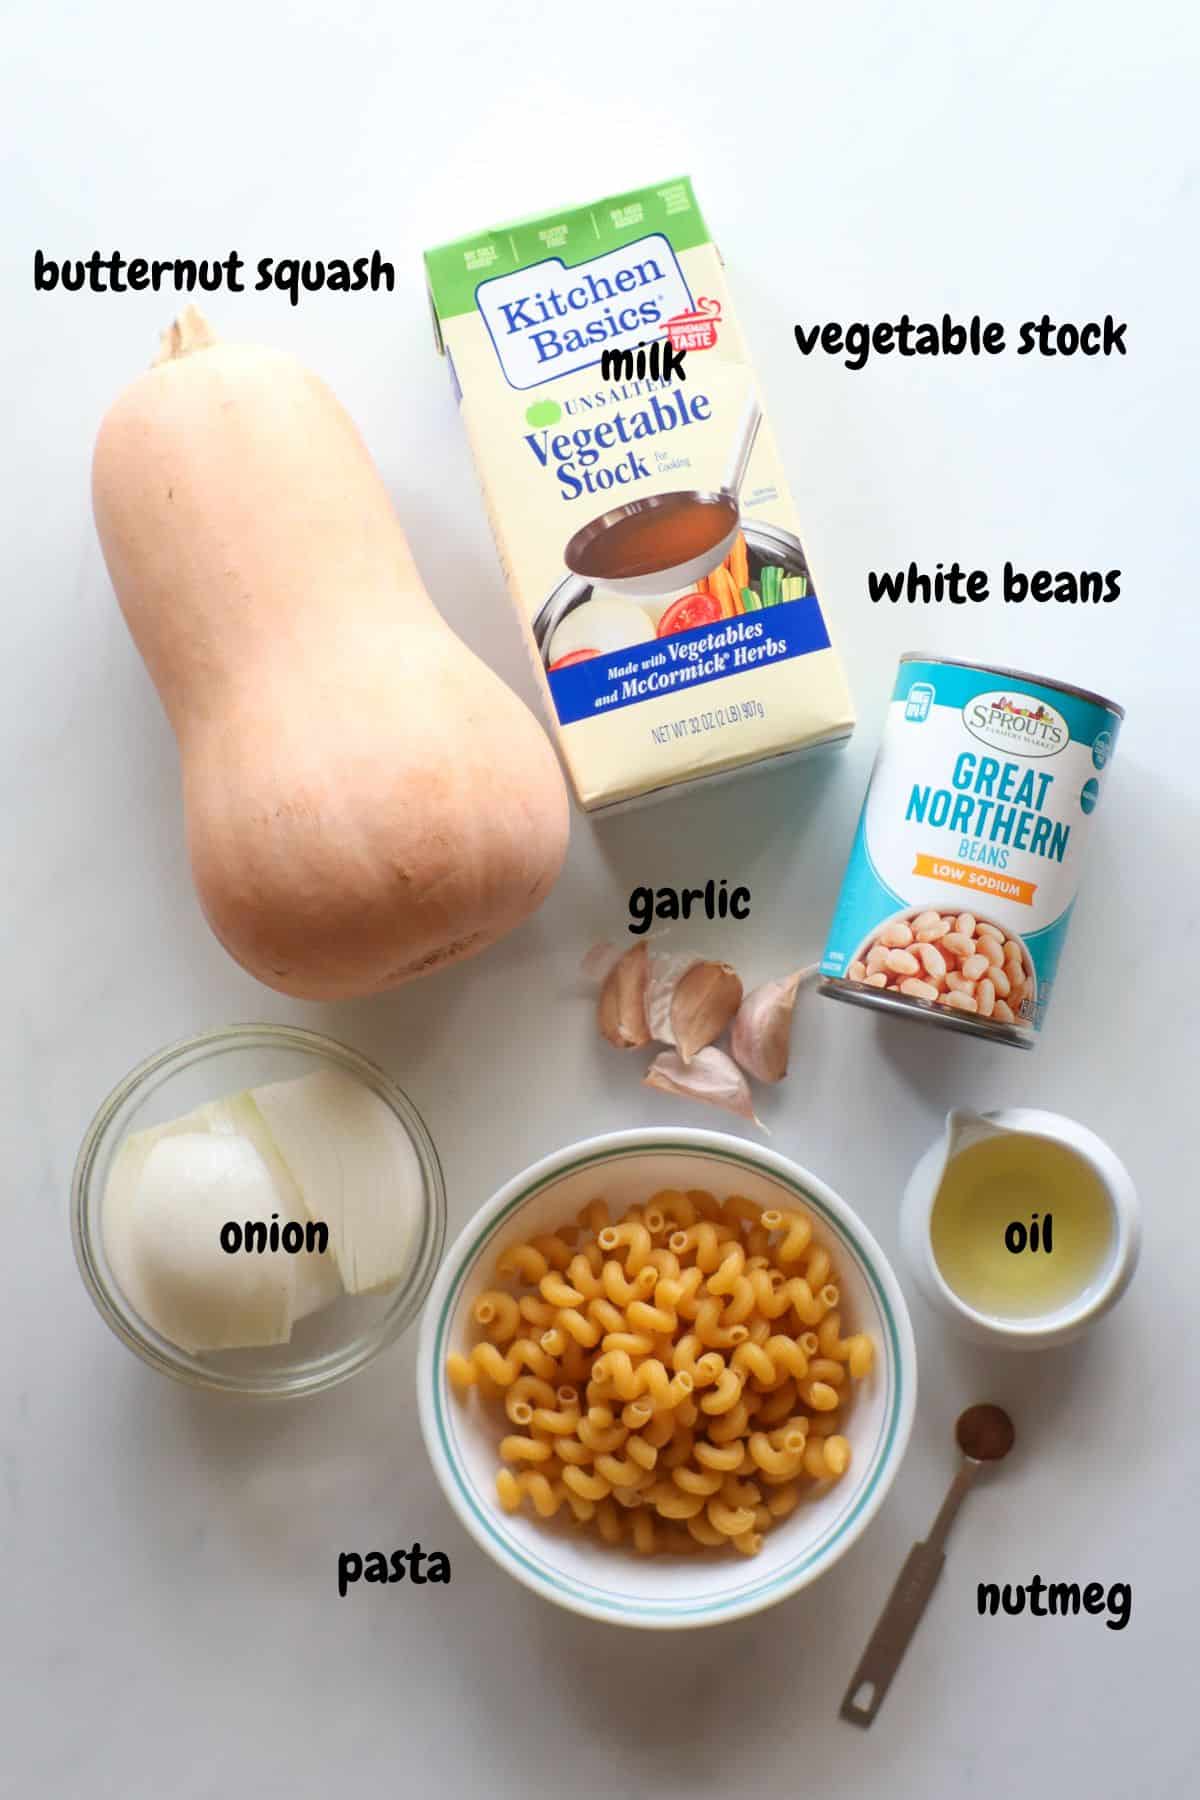 All the ingredients labeled and laid out on a white background.